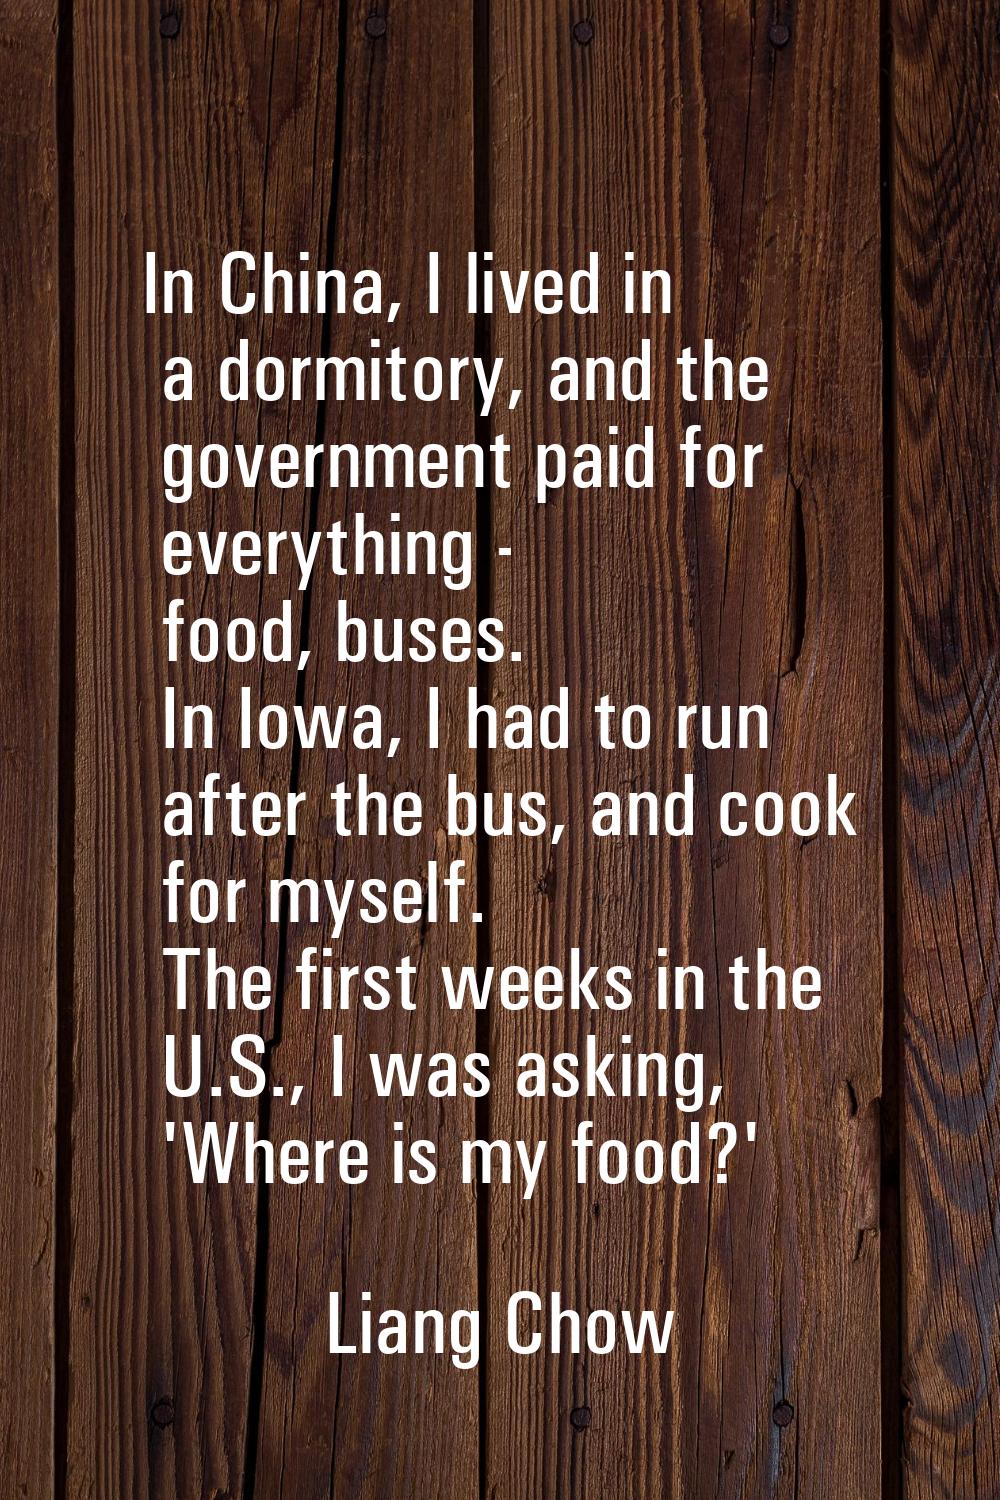 In China, I lived in a dormitory, and the government paid for everything - food, buses. In Iowa, I 